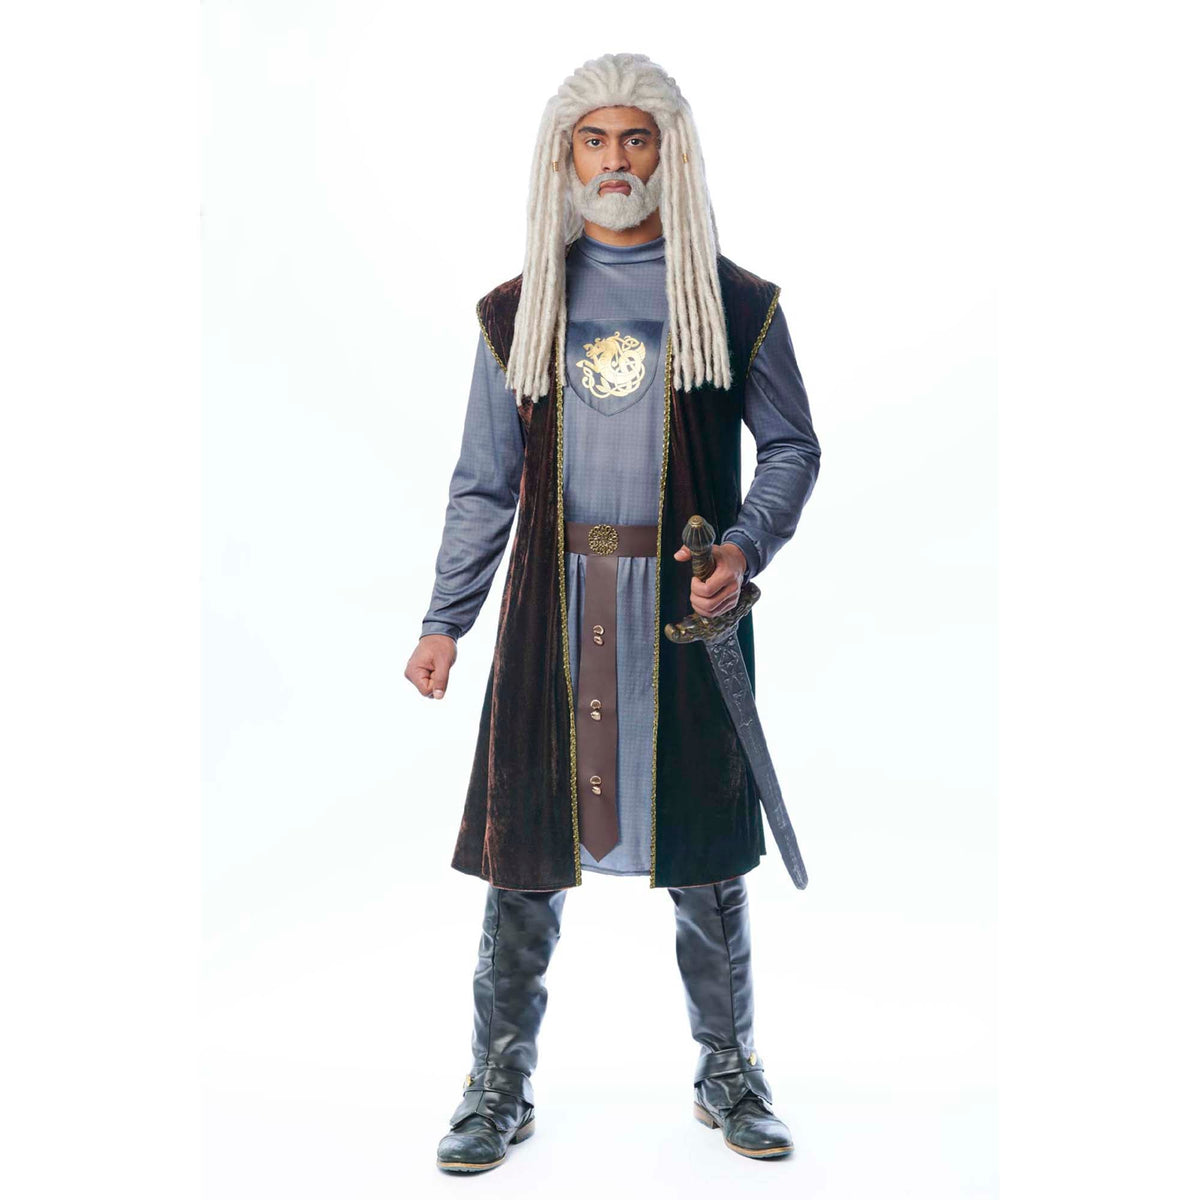 COSTUME CULTURE BY FRANCO Costumes Lord of the Sea Costume for Adults, Blue Tunic